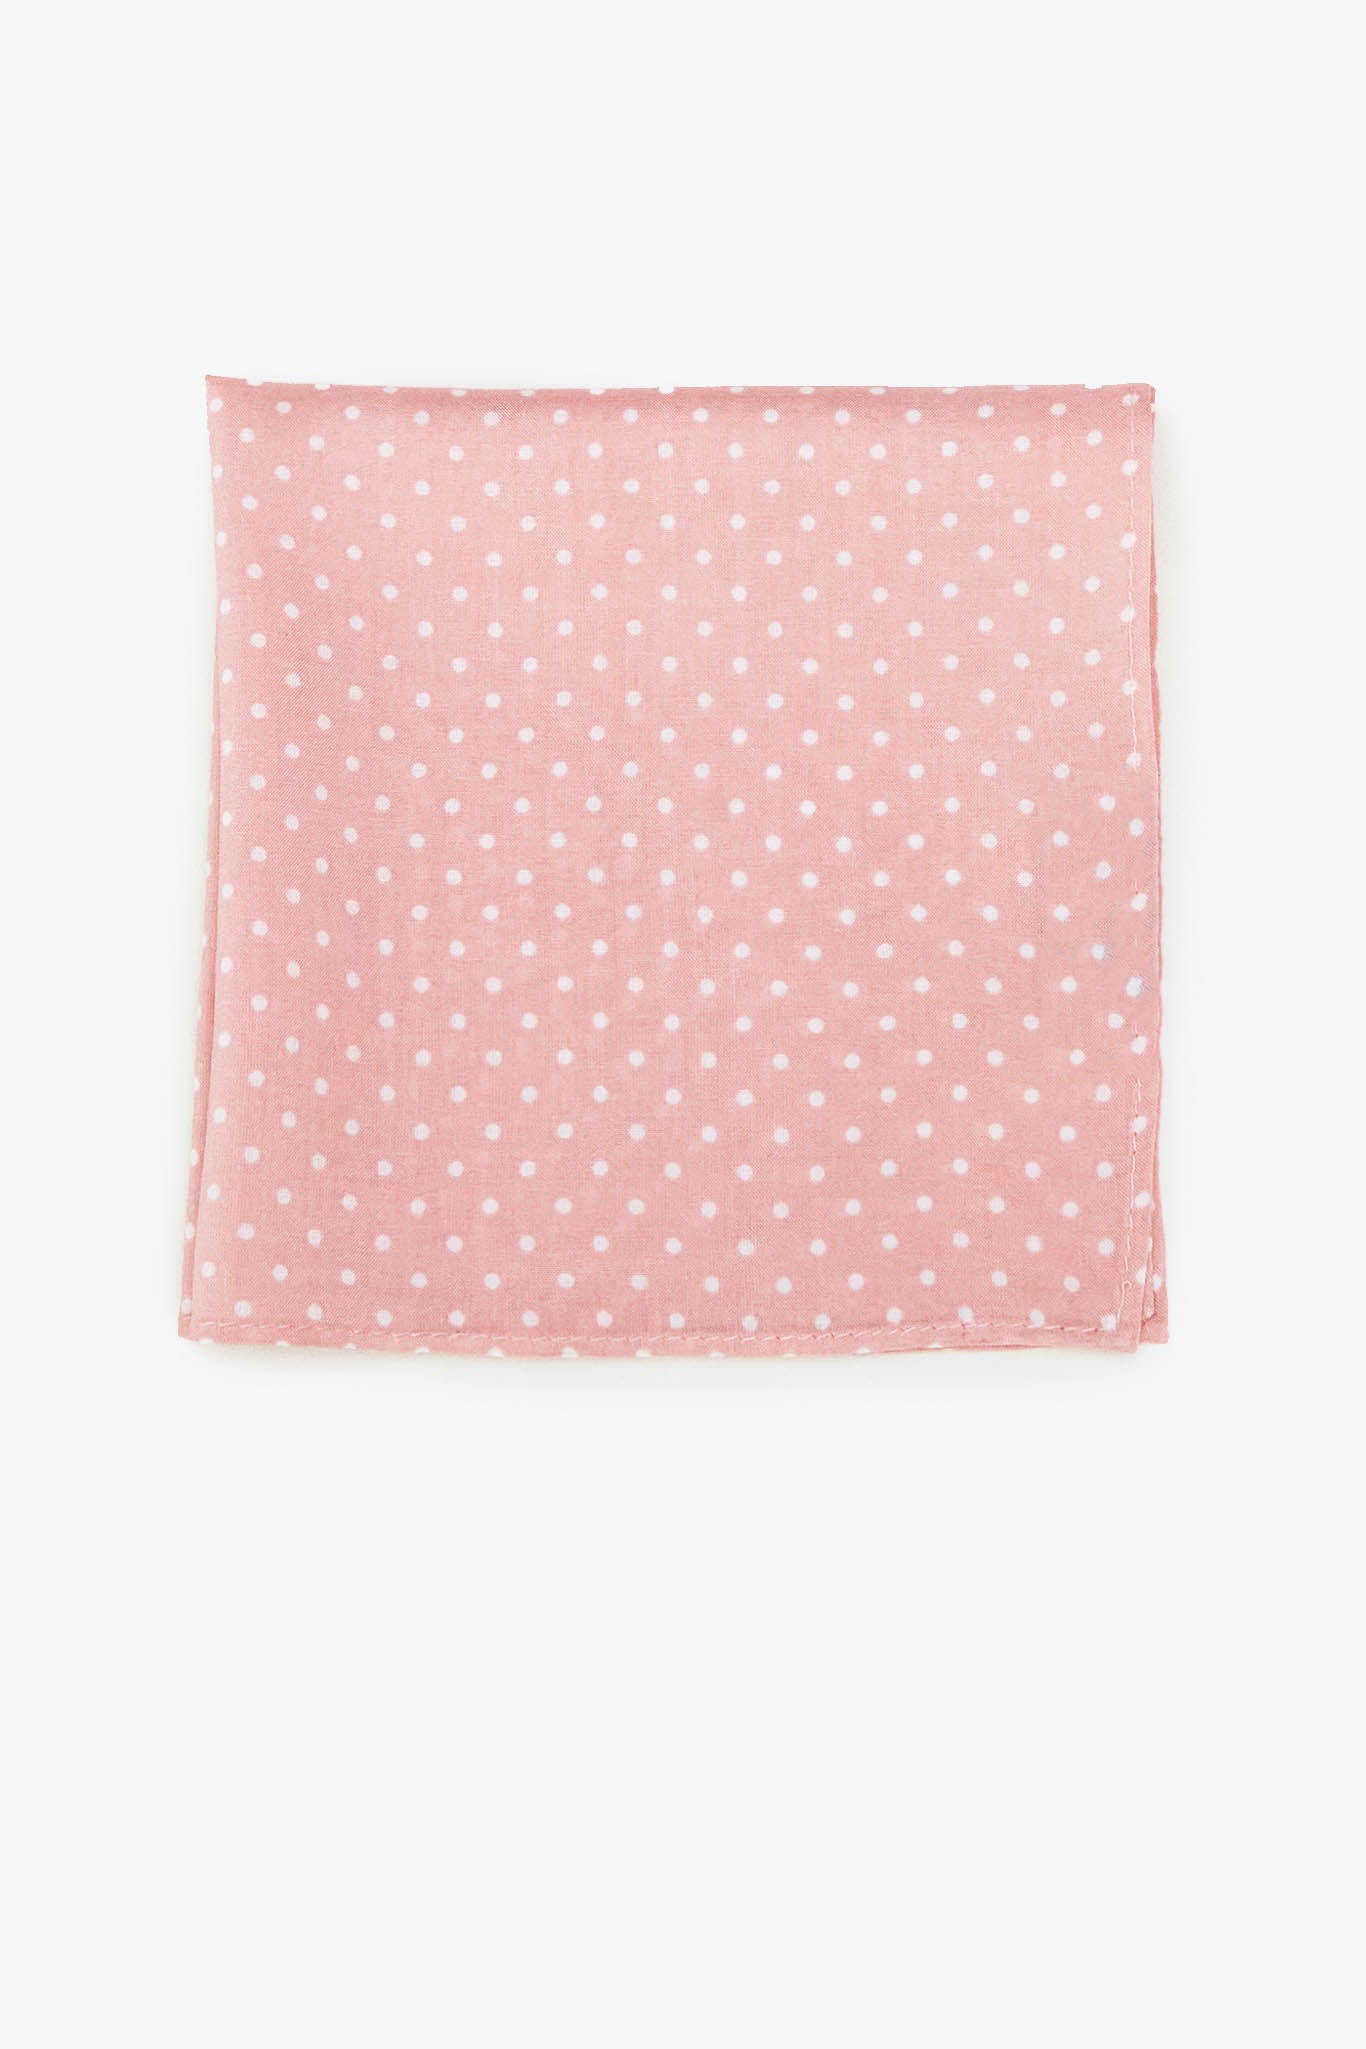 Didi Pocket Square in dusty rose dot by Birdy Grey, front view